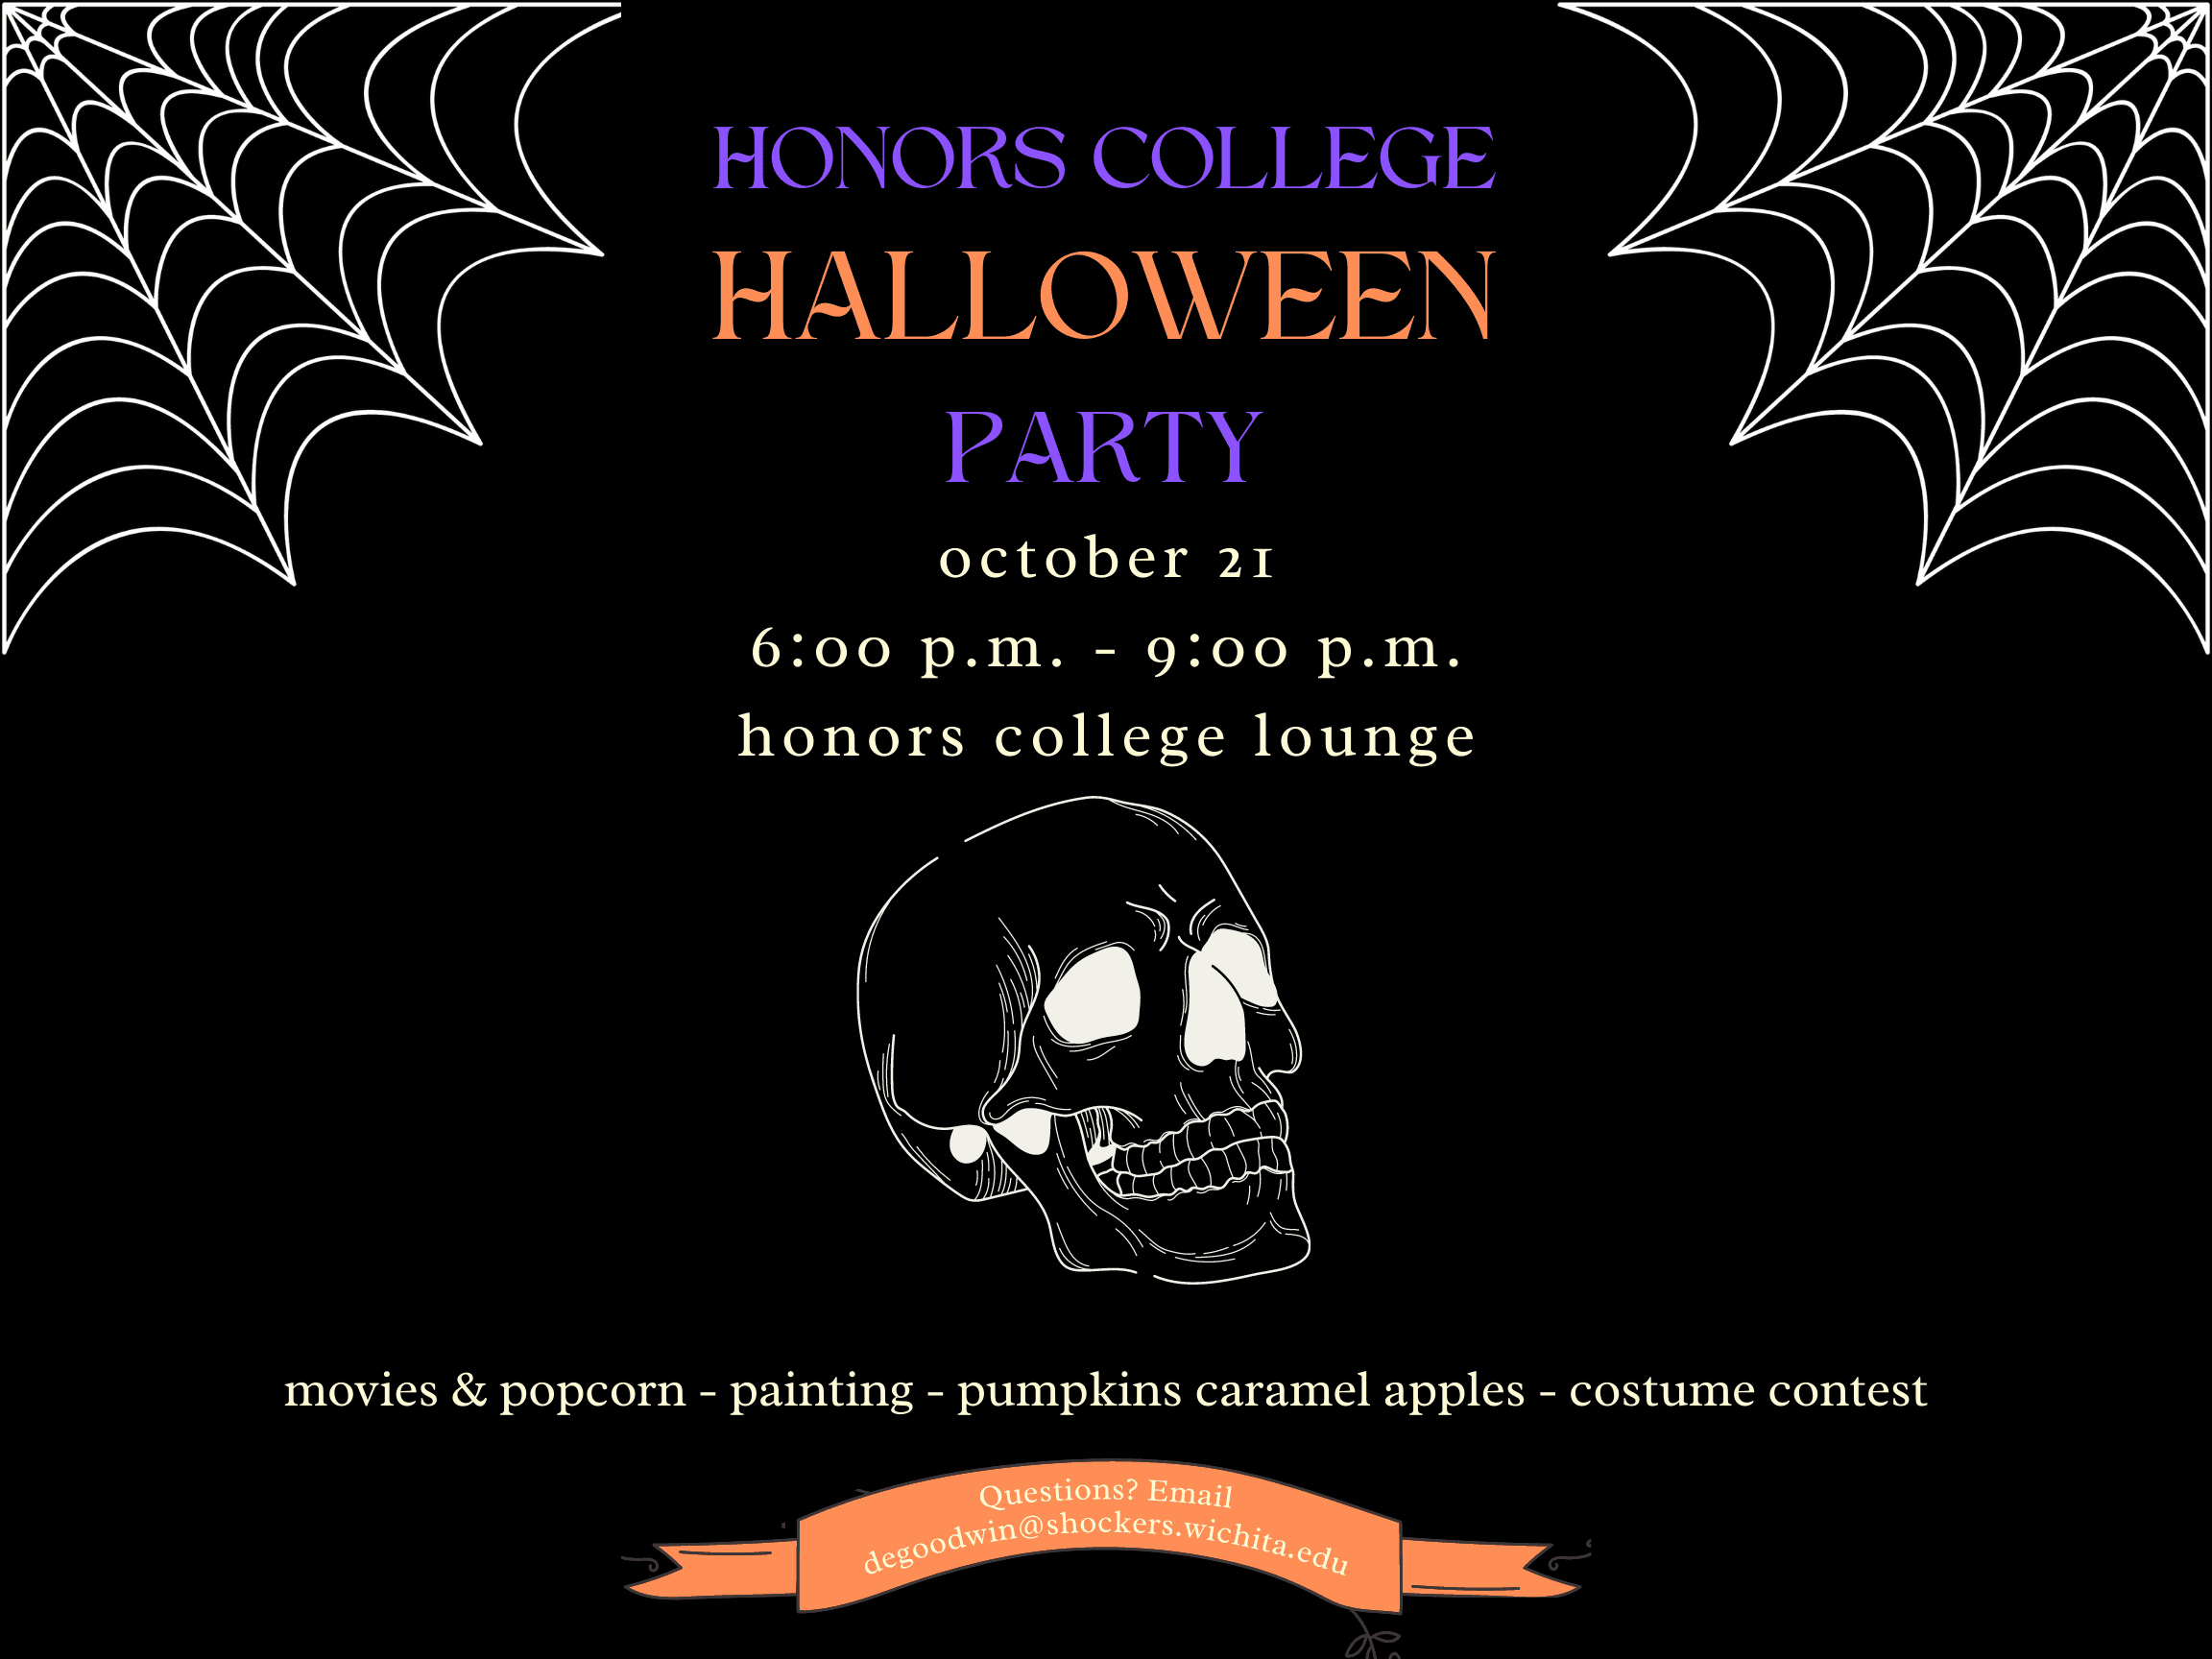 Image with a black font, green leaf frame and white skull outline in the middle. The text in the middle says: "Honors College Halloween Party. October 21. 6-9pm Honors College Lounge. Movies & Popcorn, Painting Pumpkins, Caramel Apples, Costume Contest". At the bottom in orange text box: "Questions? Email degoodwin@shockers.wichita.edu".